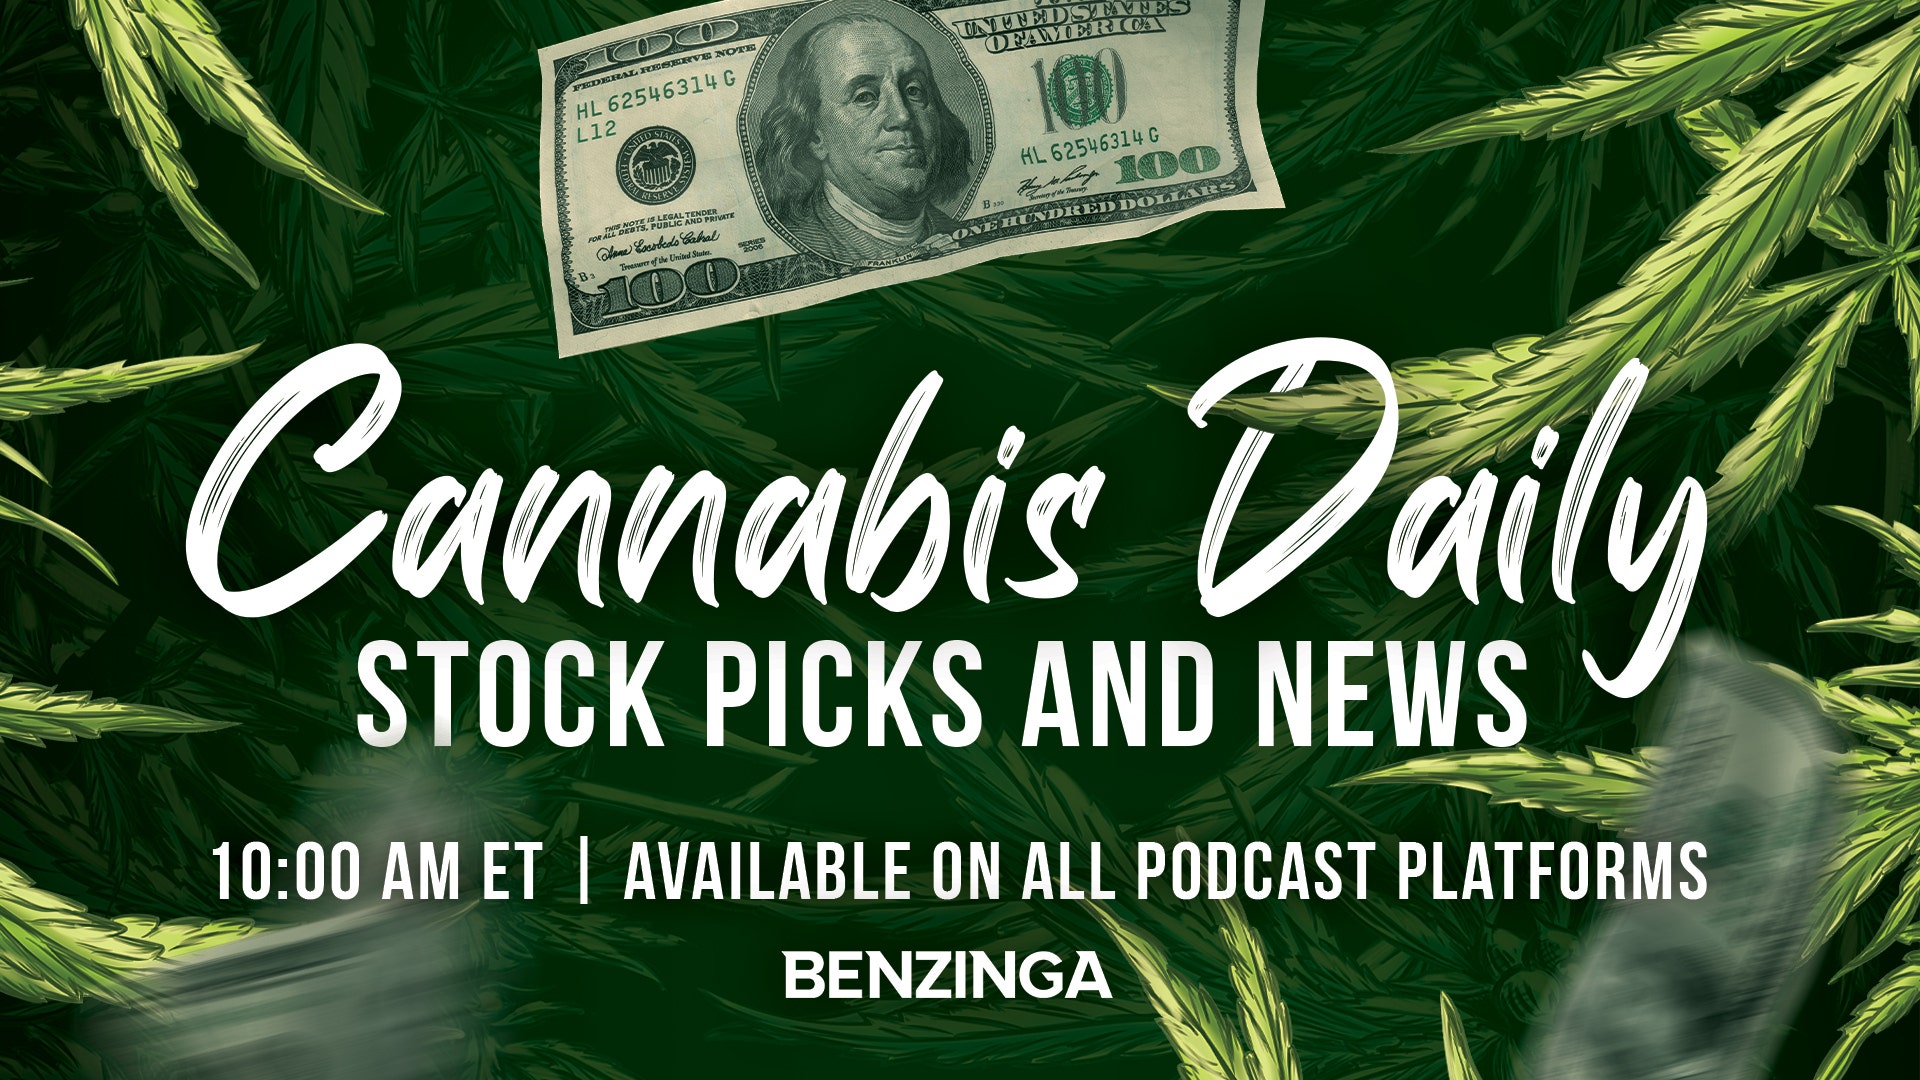 Wall Street Banks Gain Over $570M From Cannabis Deals Since 2017 - Cannabis Daily Podcast 8/20